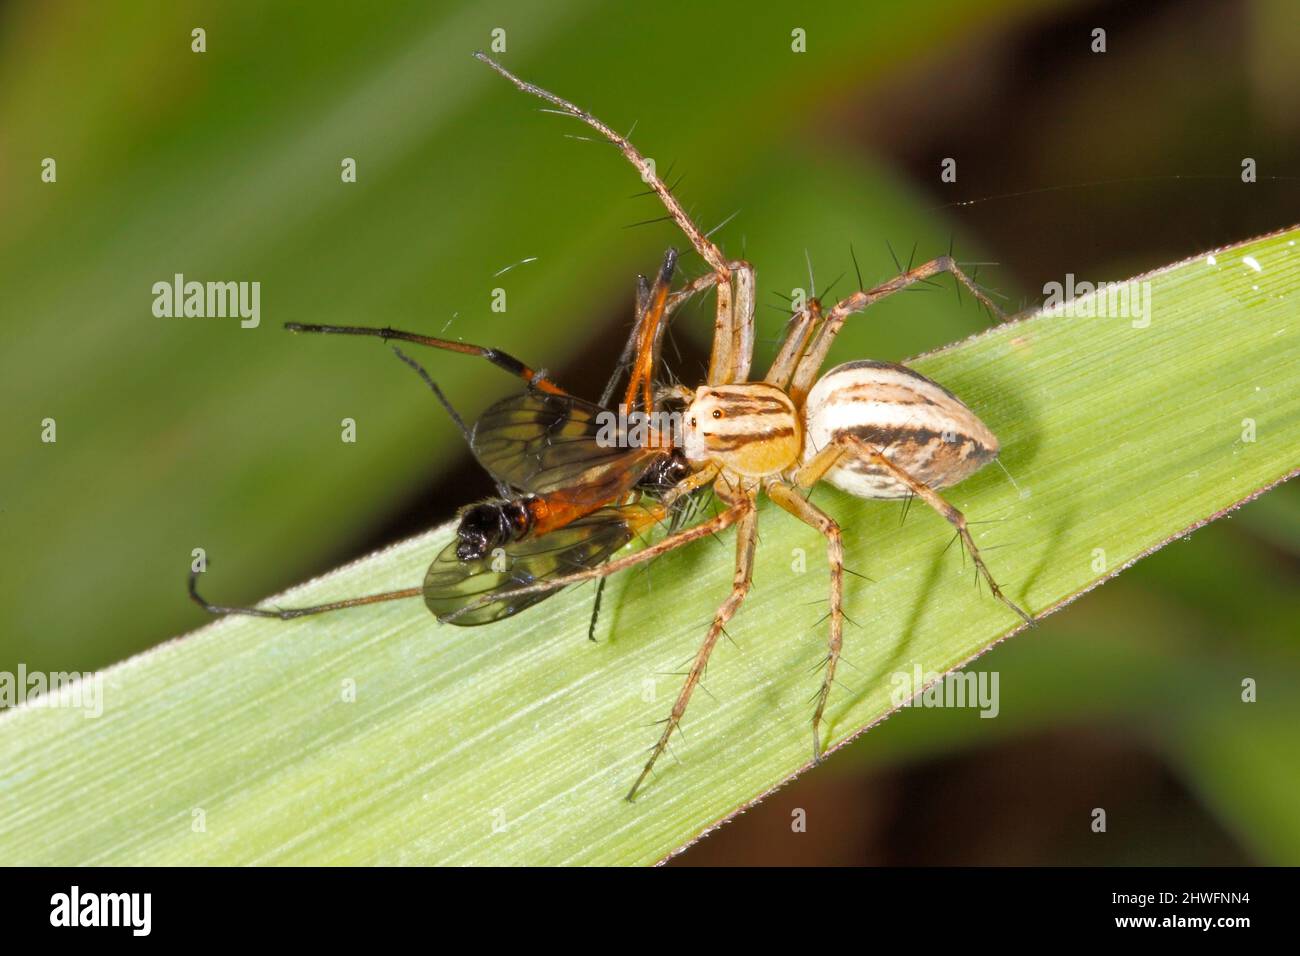 Elegant Lynx Spider, Oxyopes elegans. With prey of a fly on a grass blade. Coffs Harbour, NSW, Australia Stock Photo